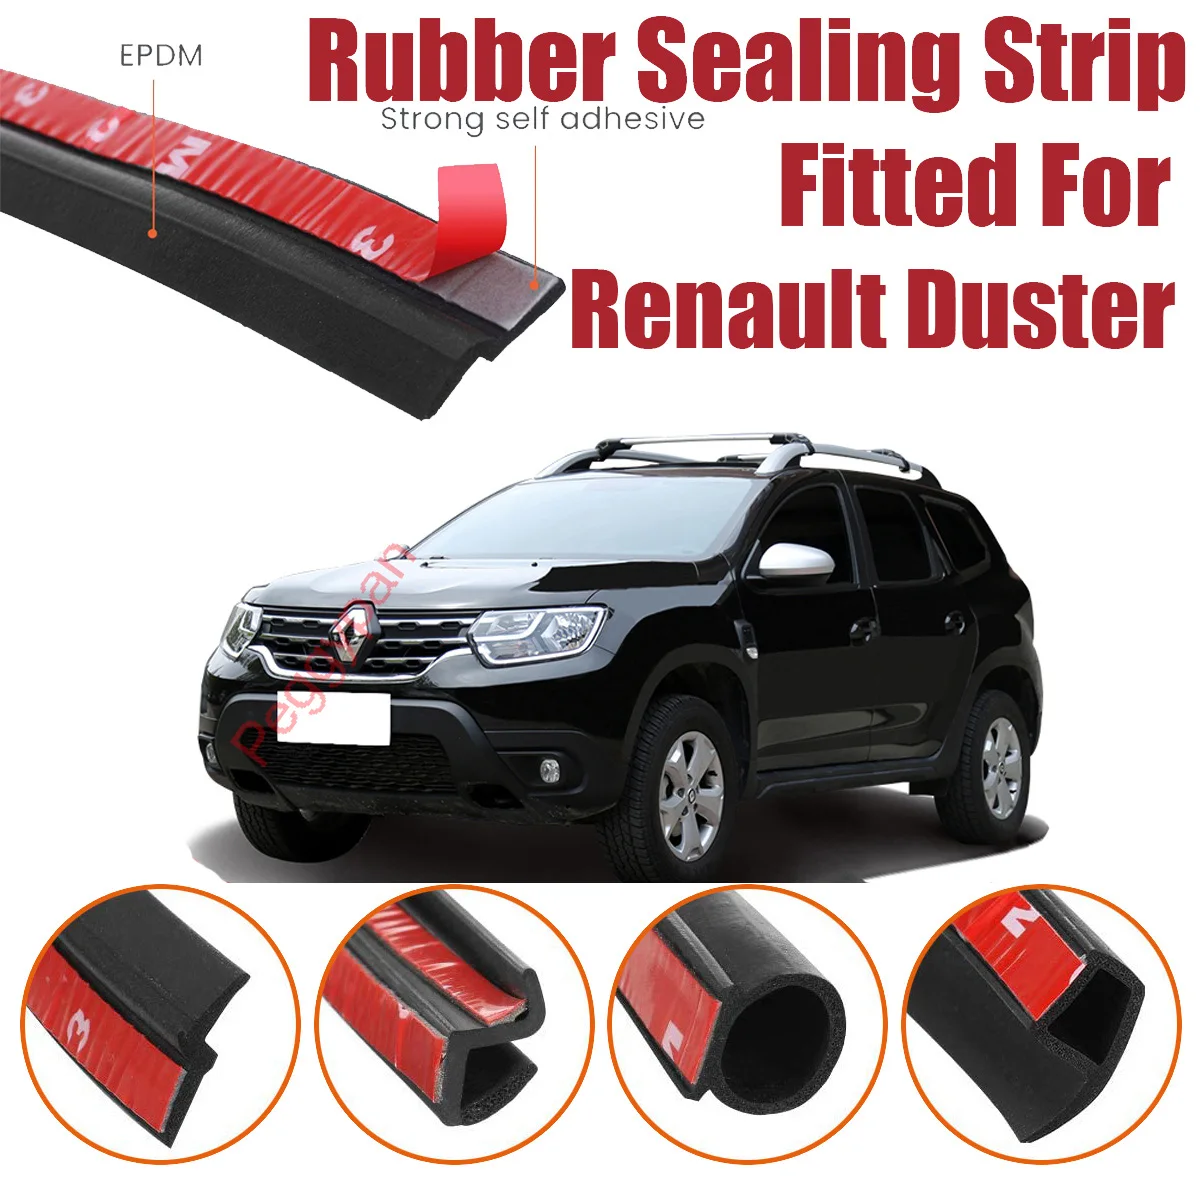 door-seal-strip-kit-self-adhesive-window-engine-cover-soundproof-rubber-weather-draft-wind-noise-reduction-for-renault-duster